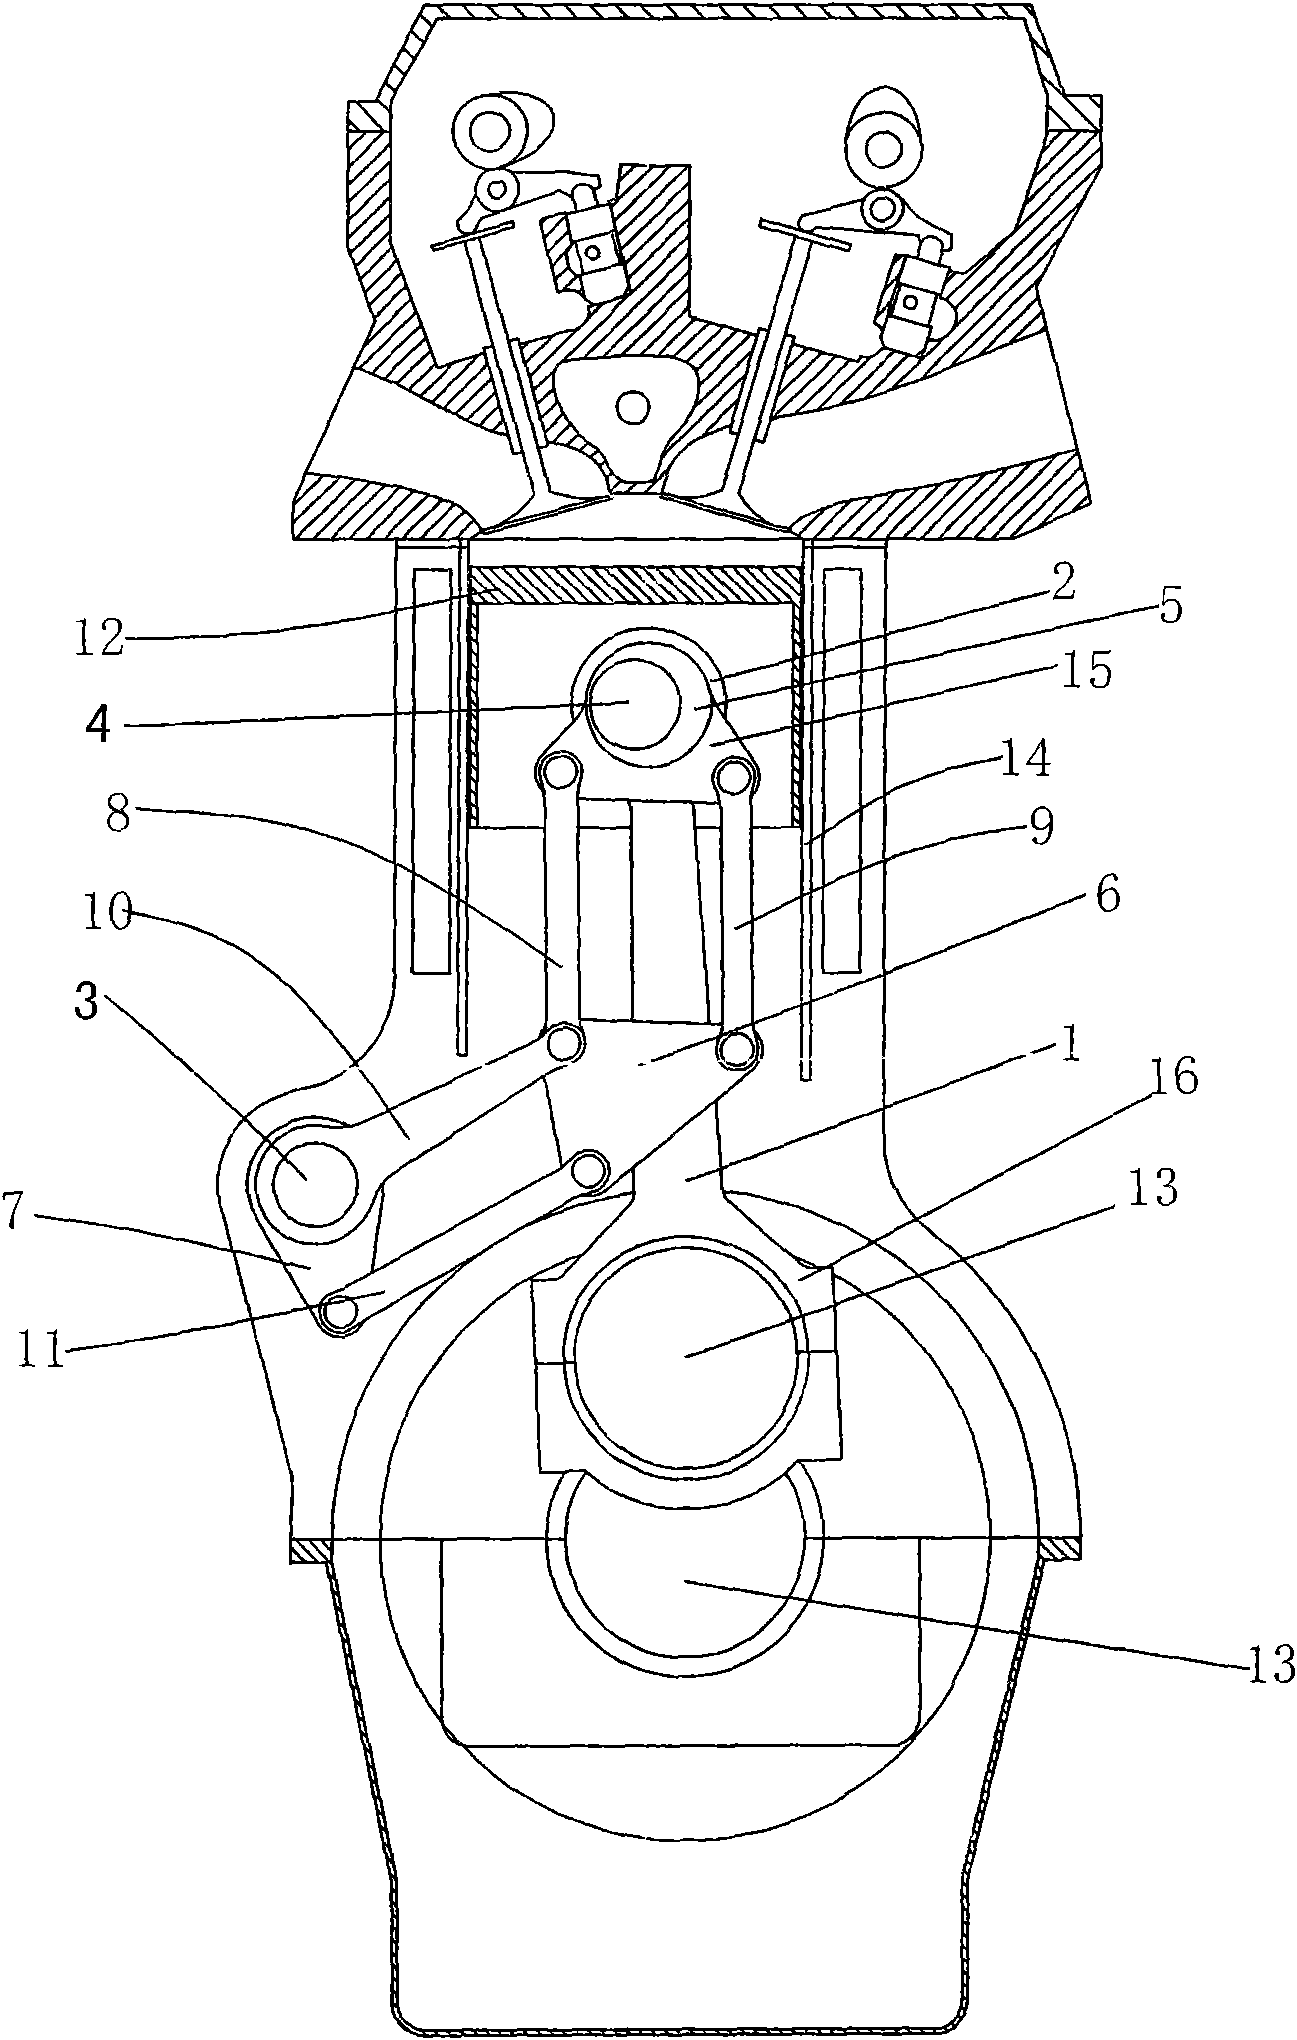 Variable compression ratio device of automobile engine